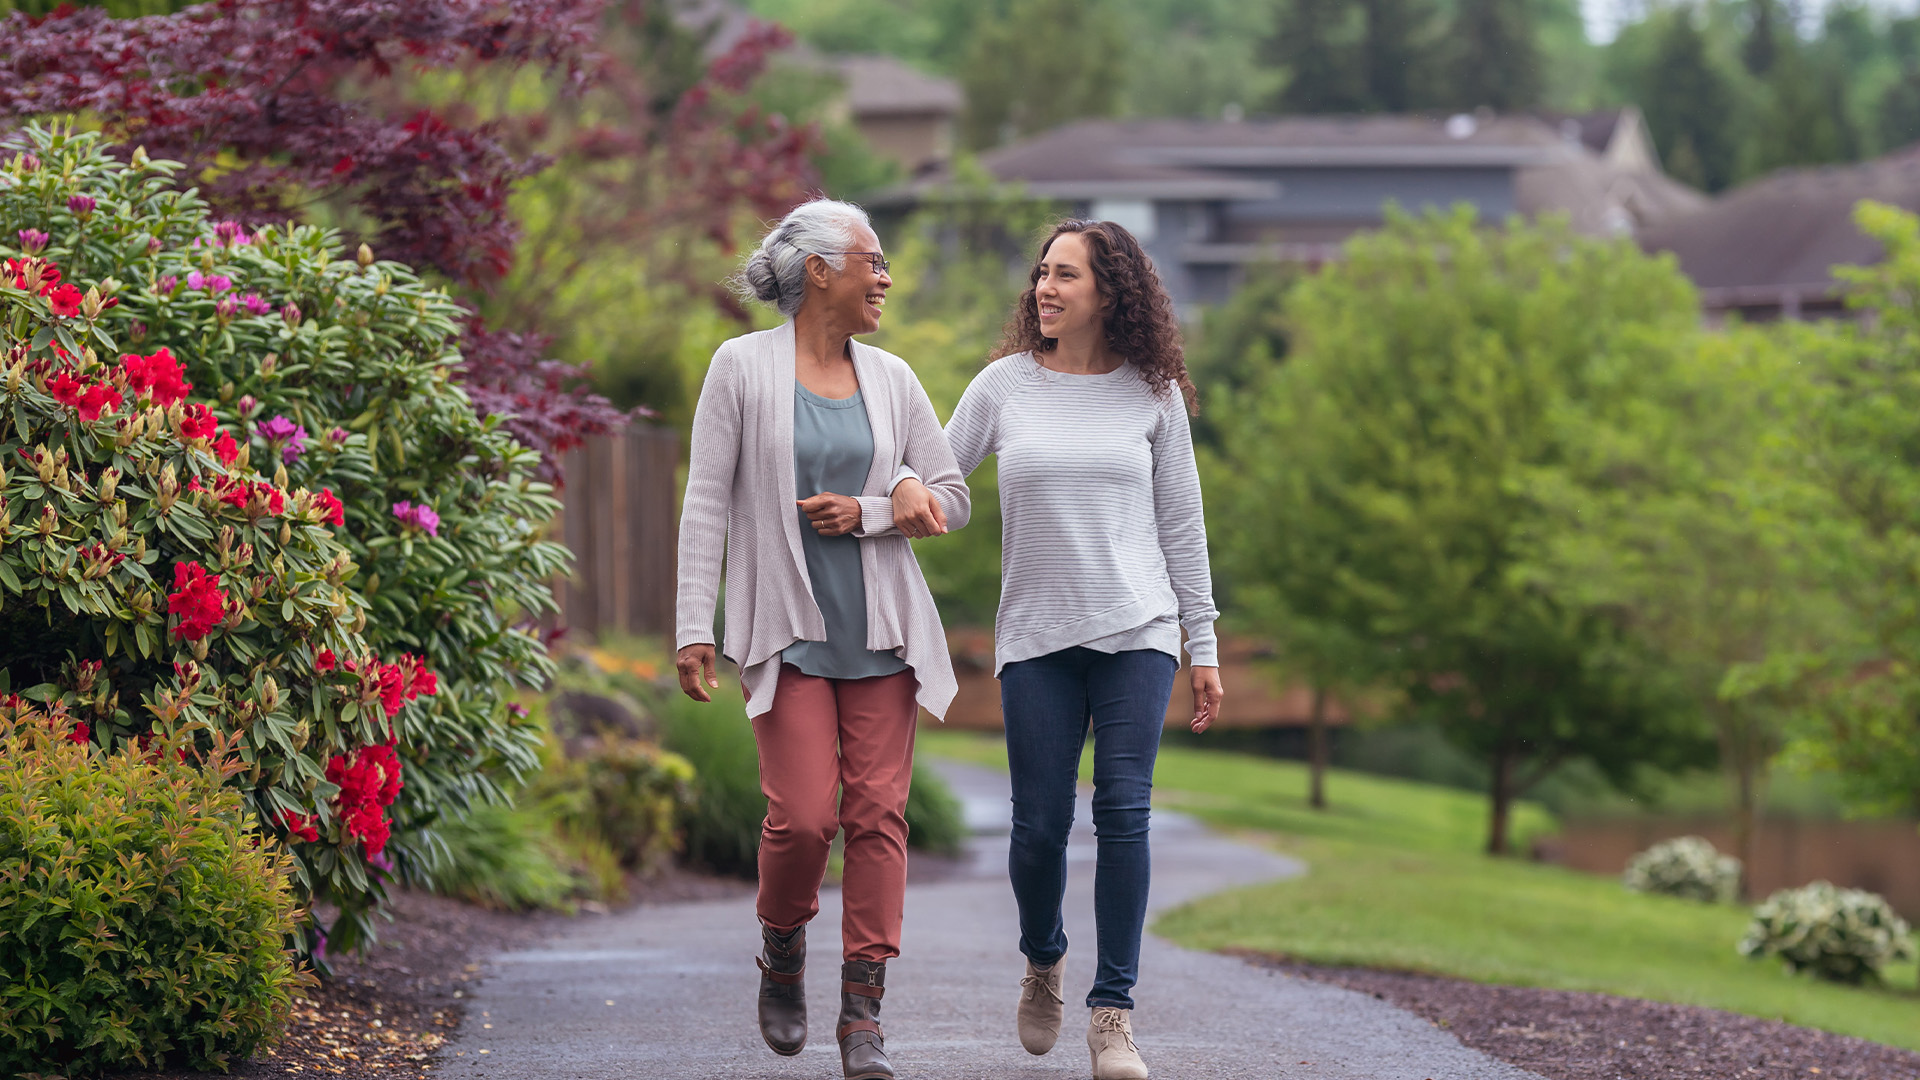 A senior woman and her adult daughter walking through a garden